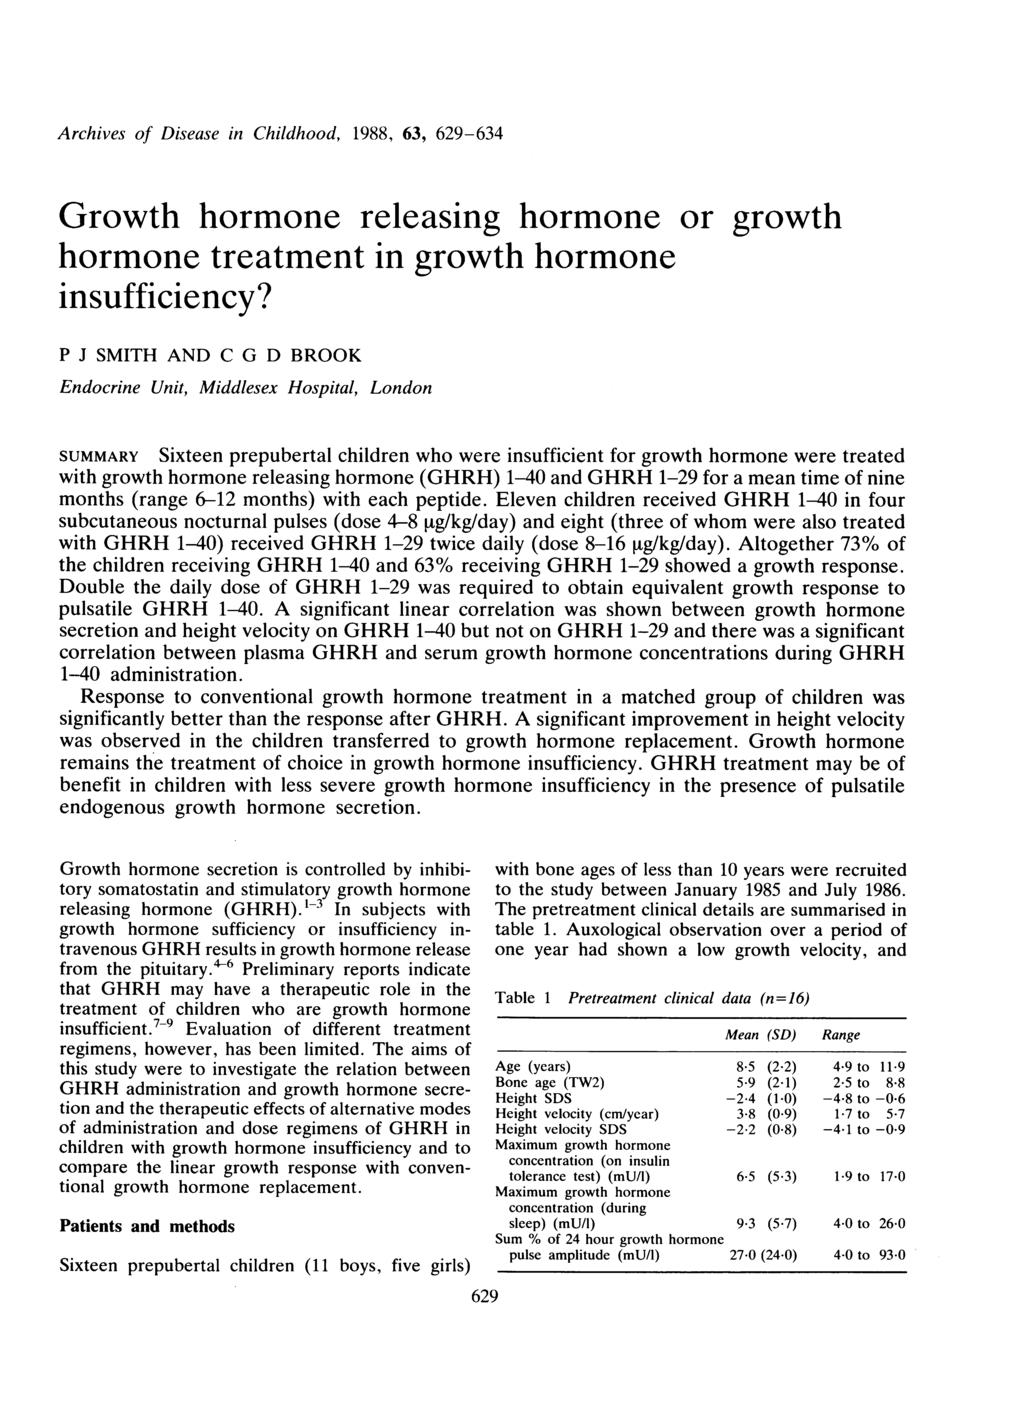 Archives of Disease in Childhood, 1988, 63, 629-634 Growth hormone releasing hormone or growth hormone treatment in growth hormone insufficiency?